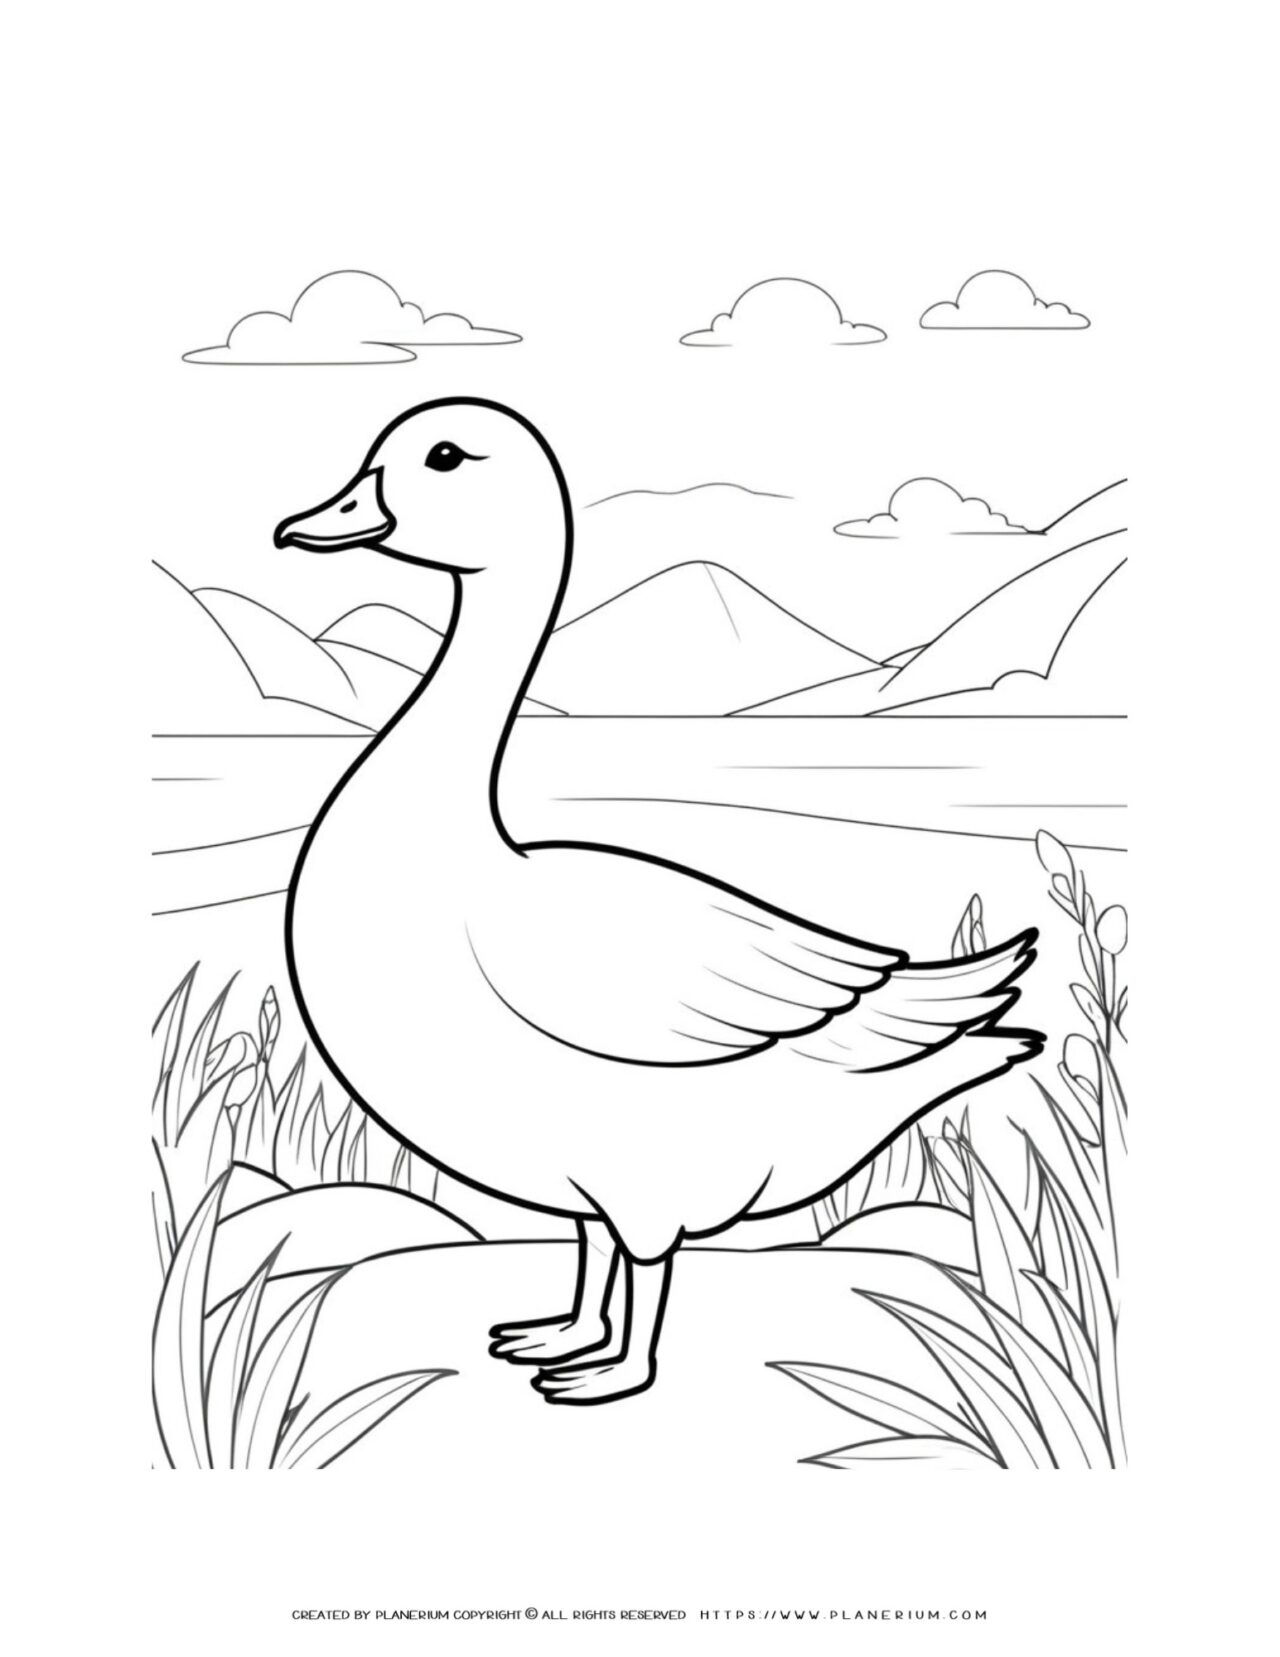 goose-in-nature-side-view-coloring-page